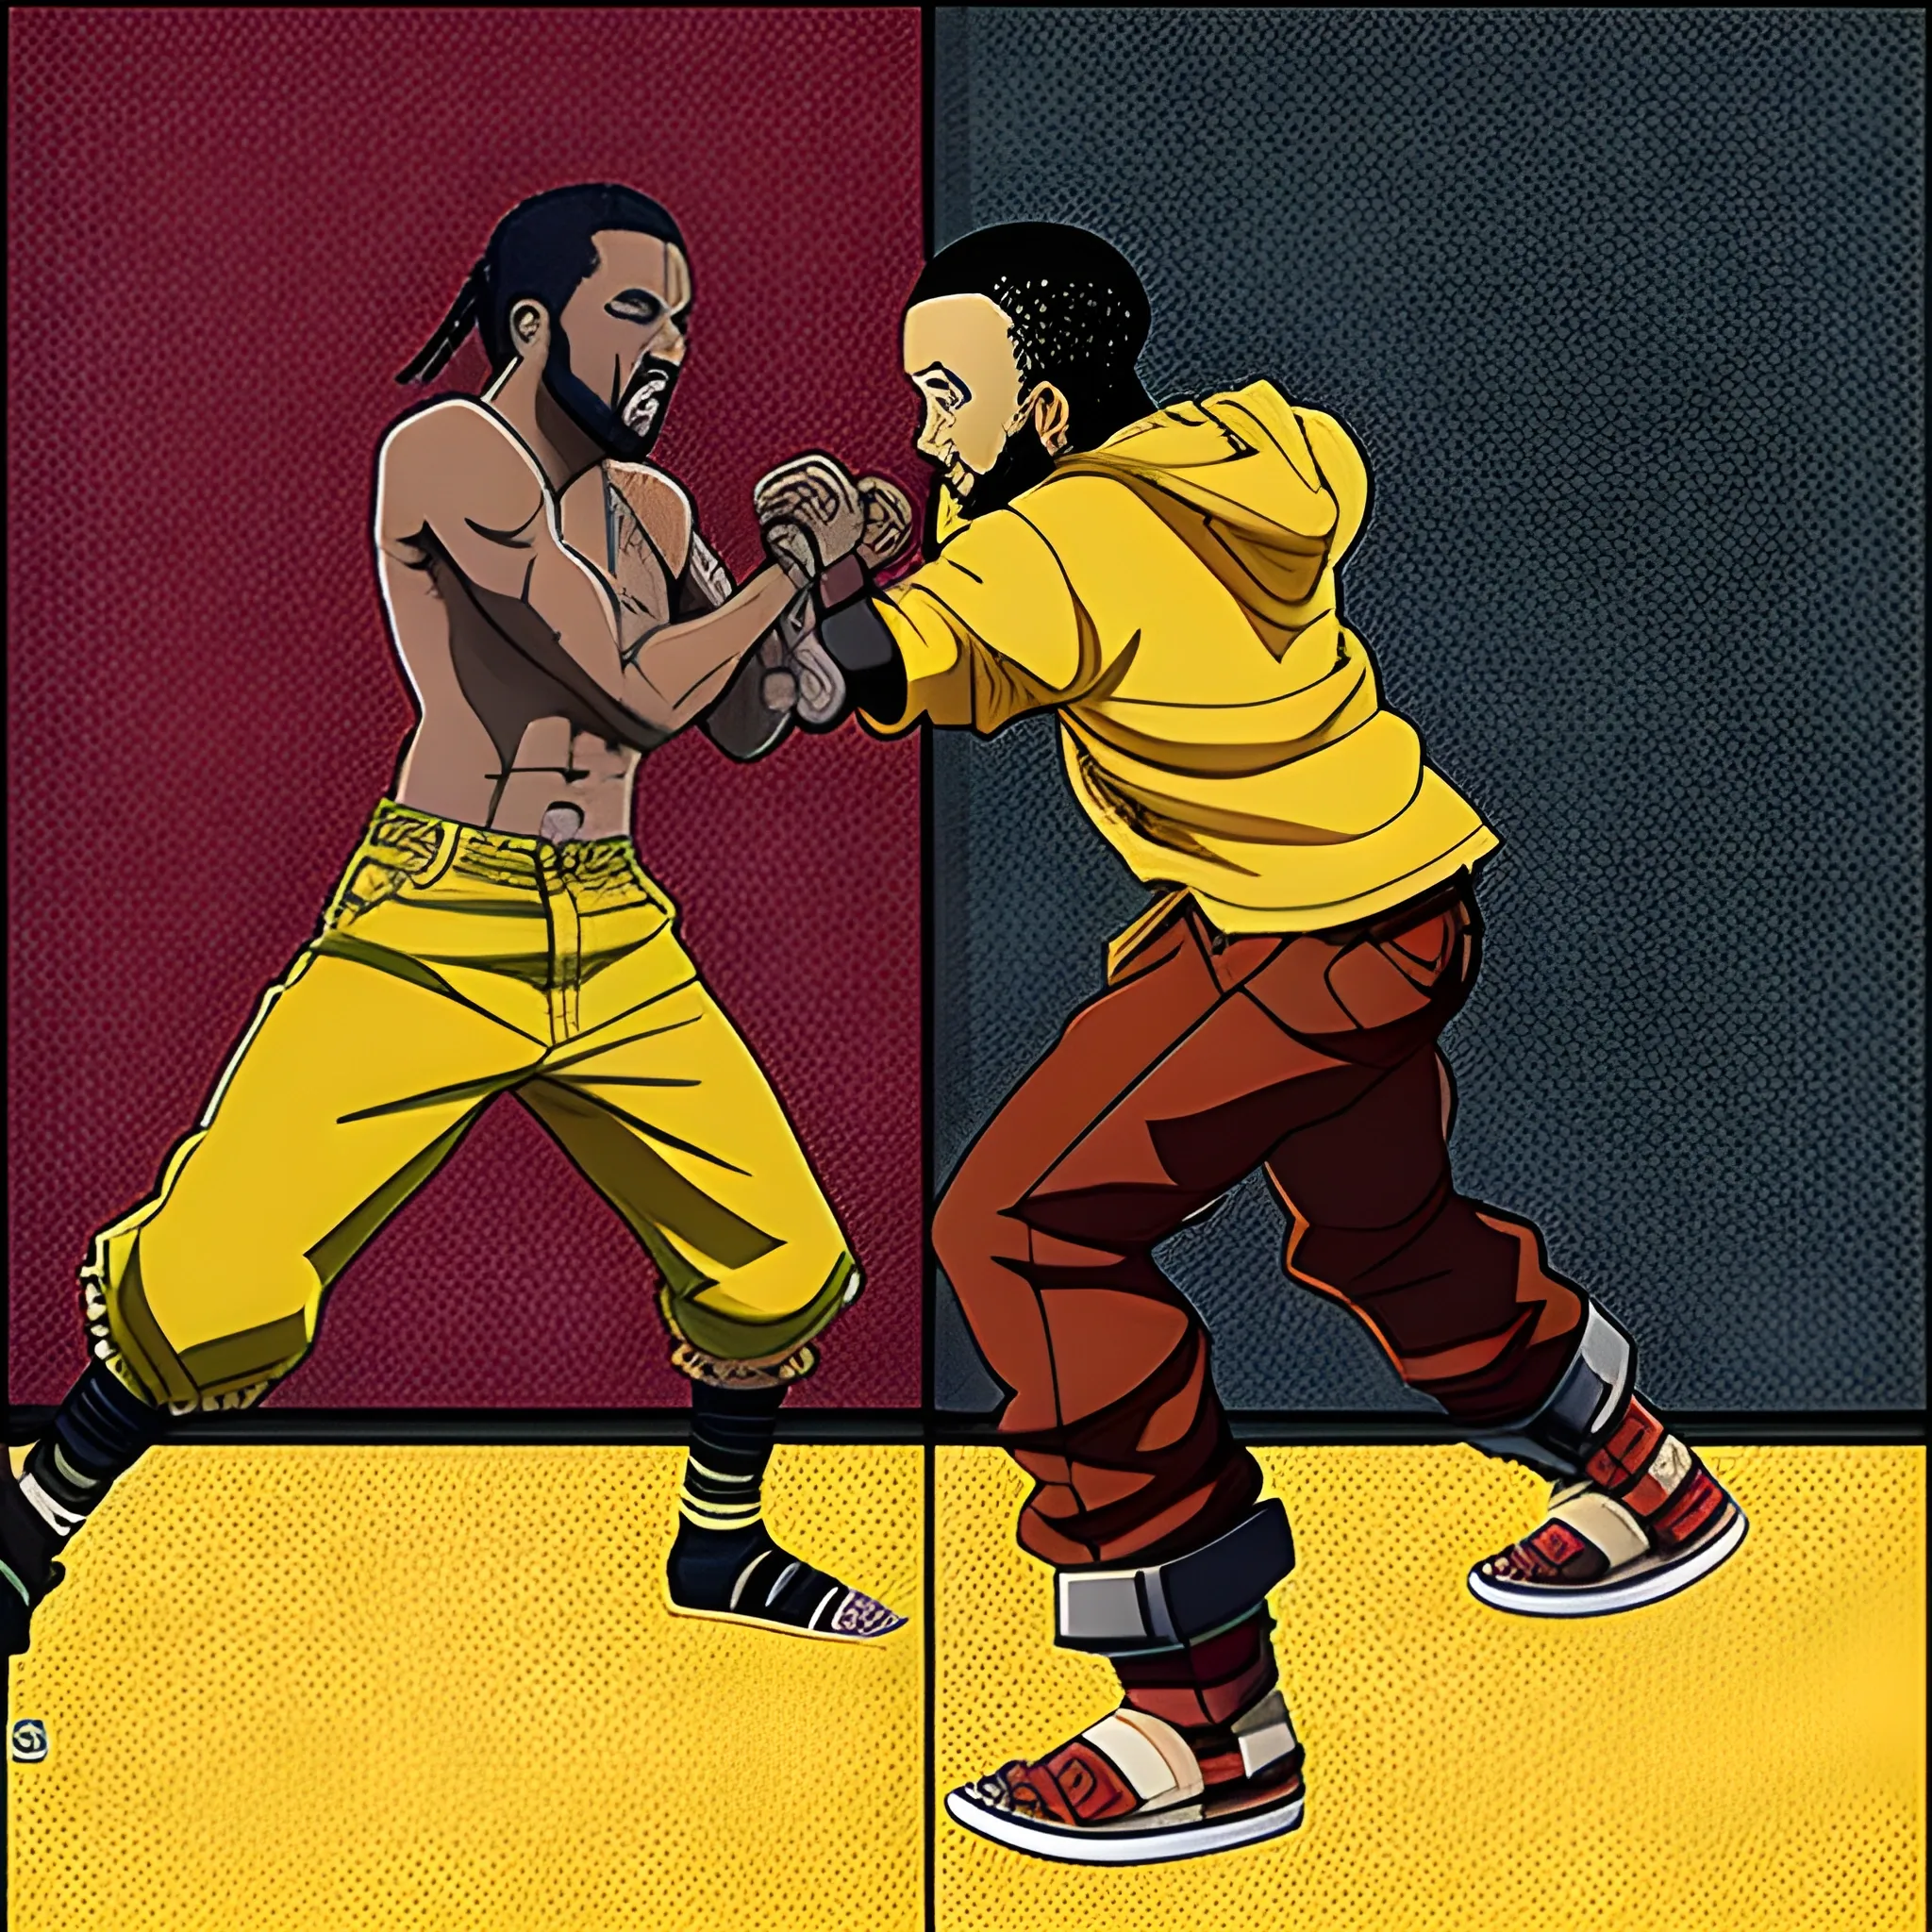 kendrick lamar and drake fighting in an epic naruto-style fight scene, 8bit
